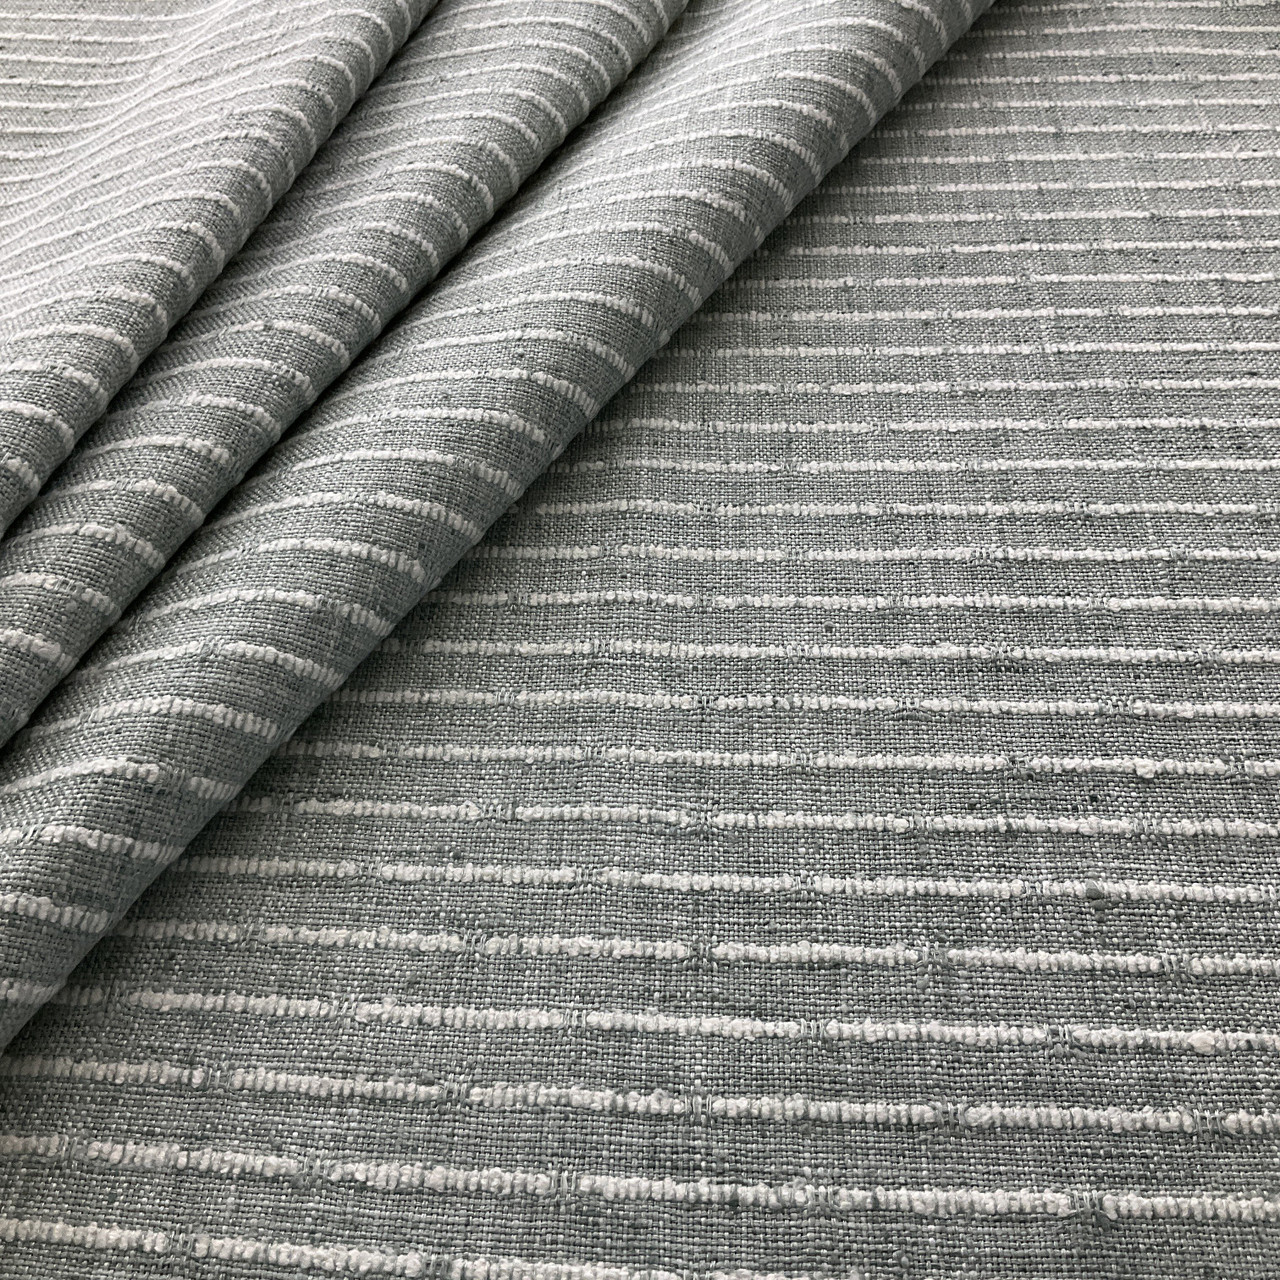 Remnant of Momentum Cover Cloth Platinum Grey Upholstery Fabric